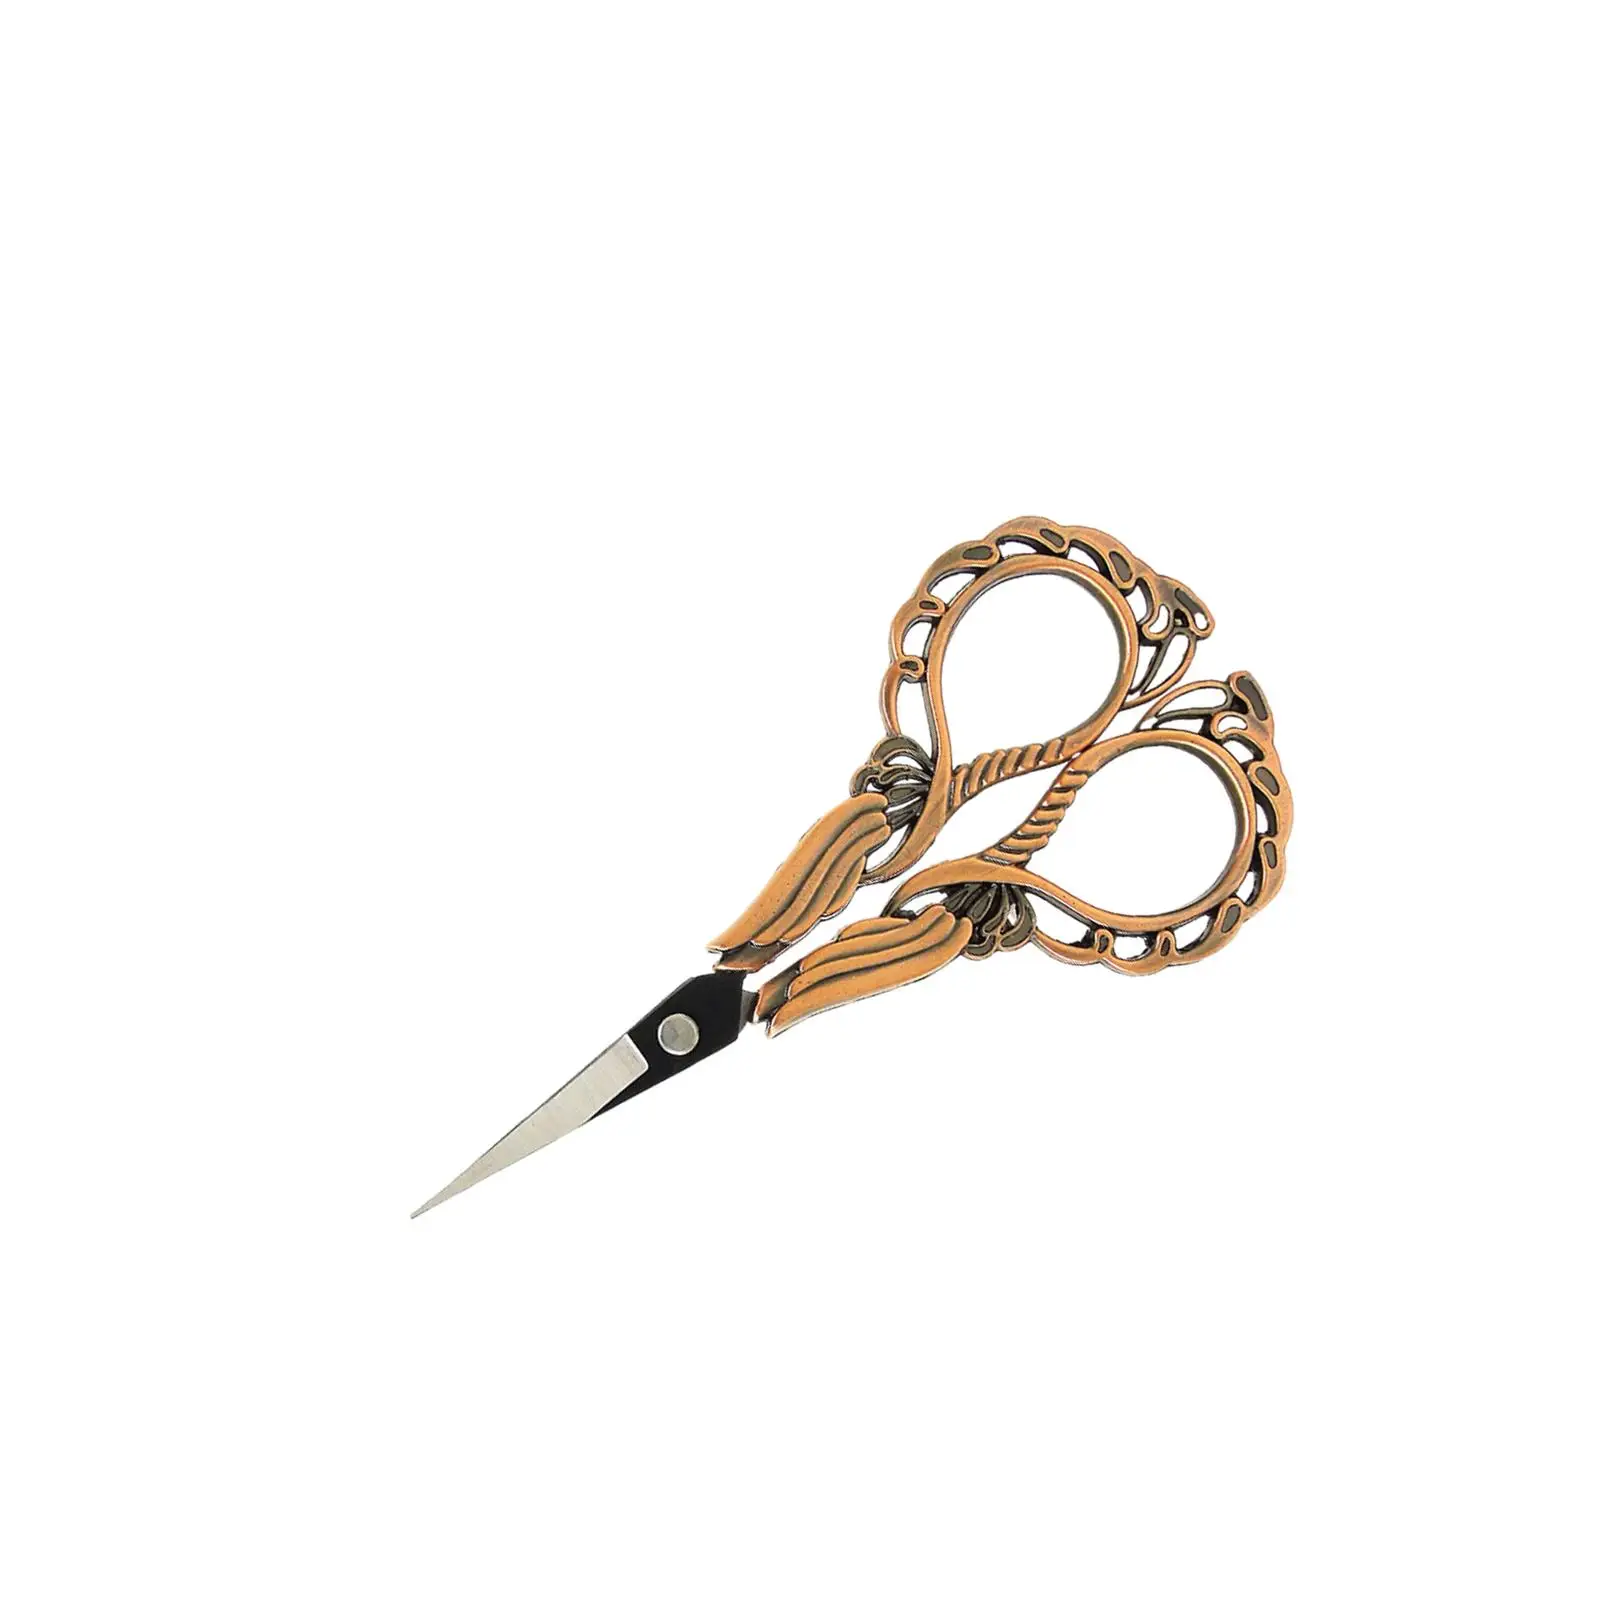 Embroidery Scissors Sewing for Thread Sewing Craft Supplies Crafting